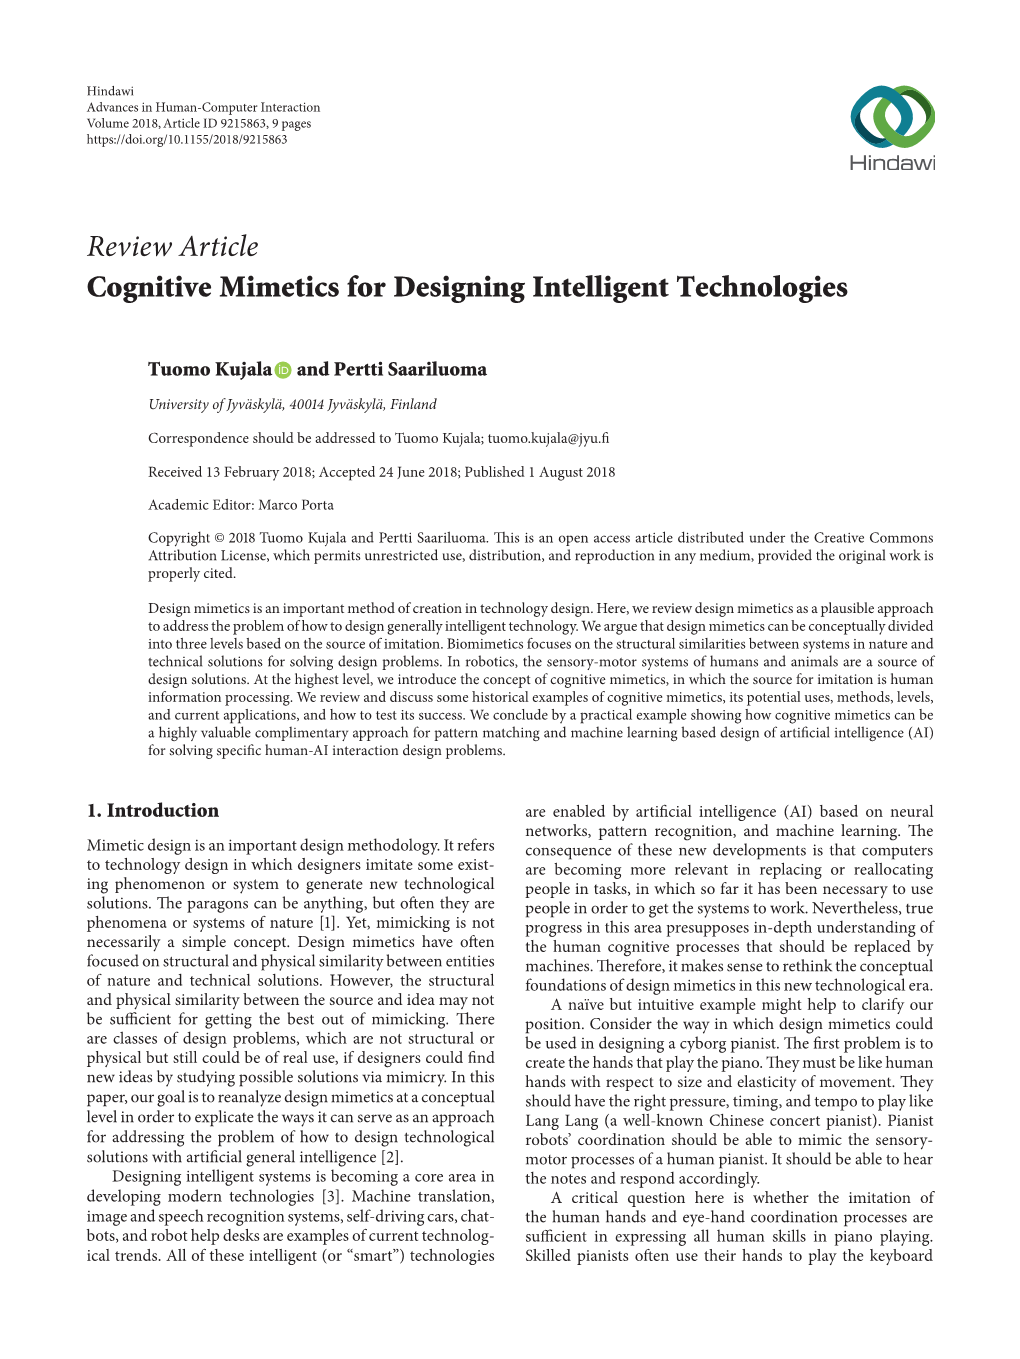 Review Article Cognitive Mimetics for Designing Intelligent Technologies